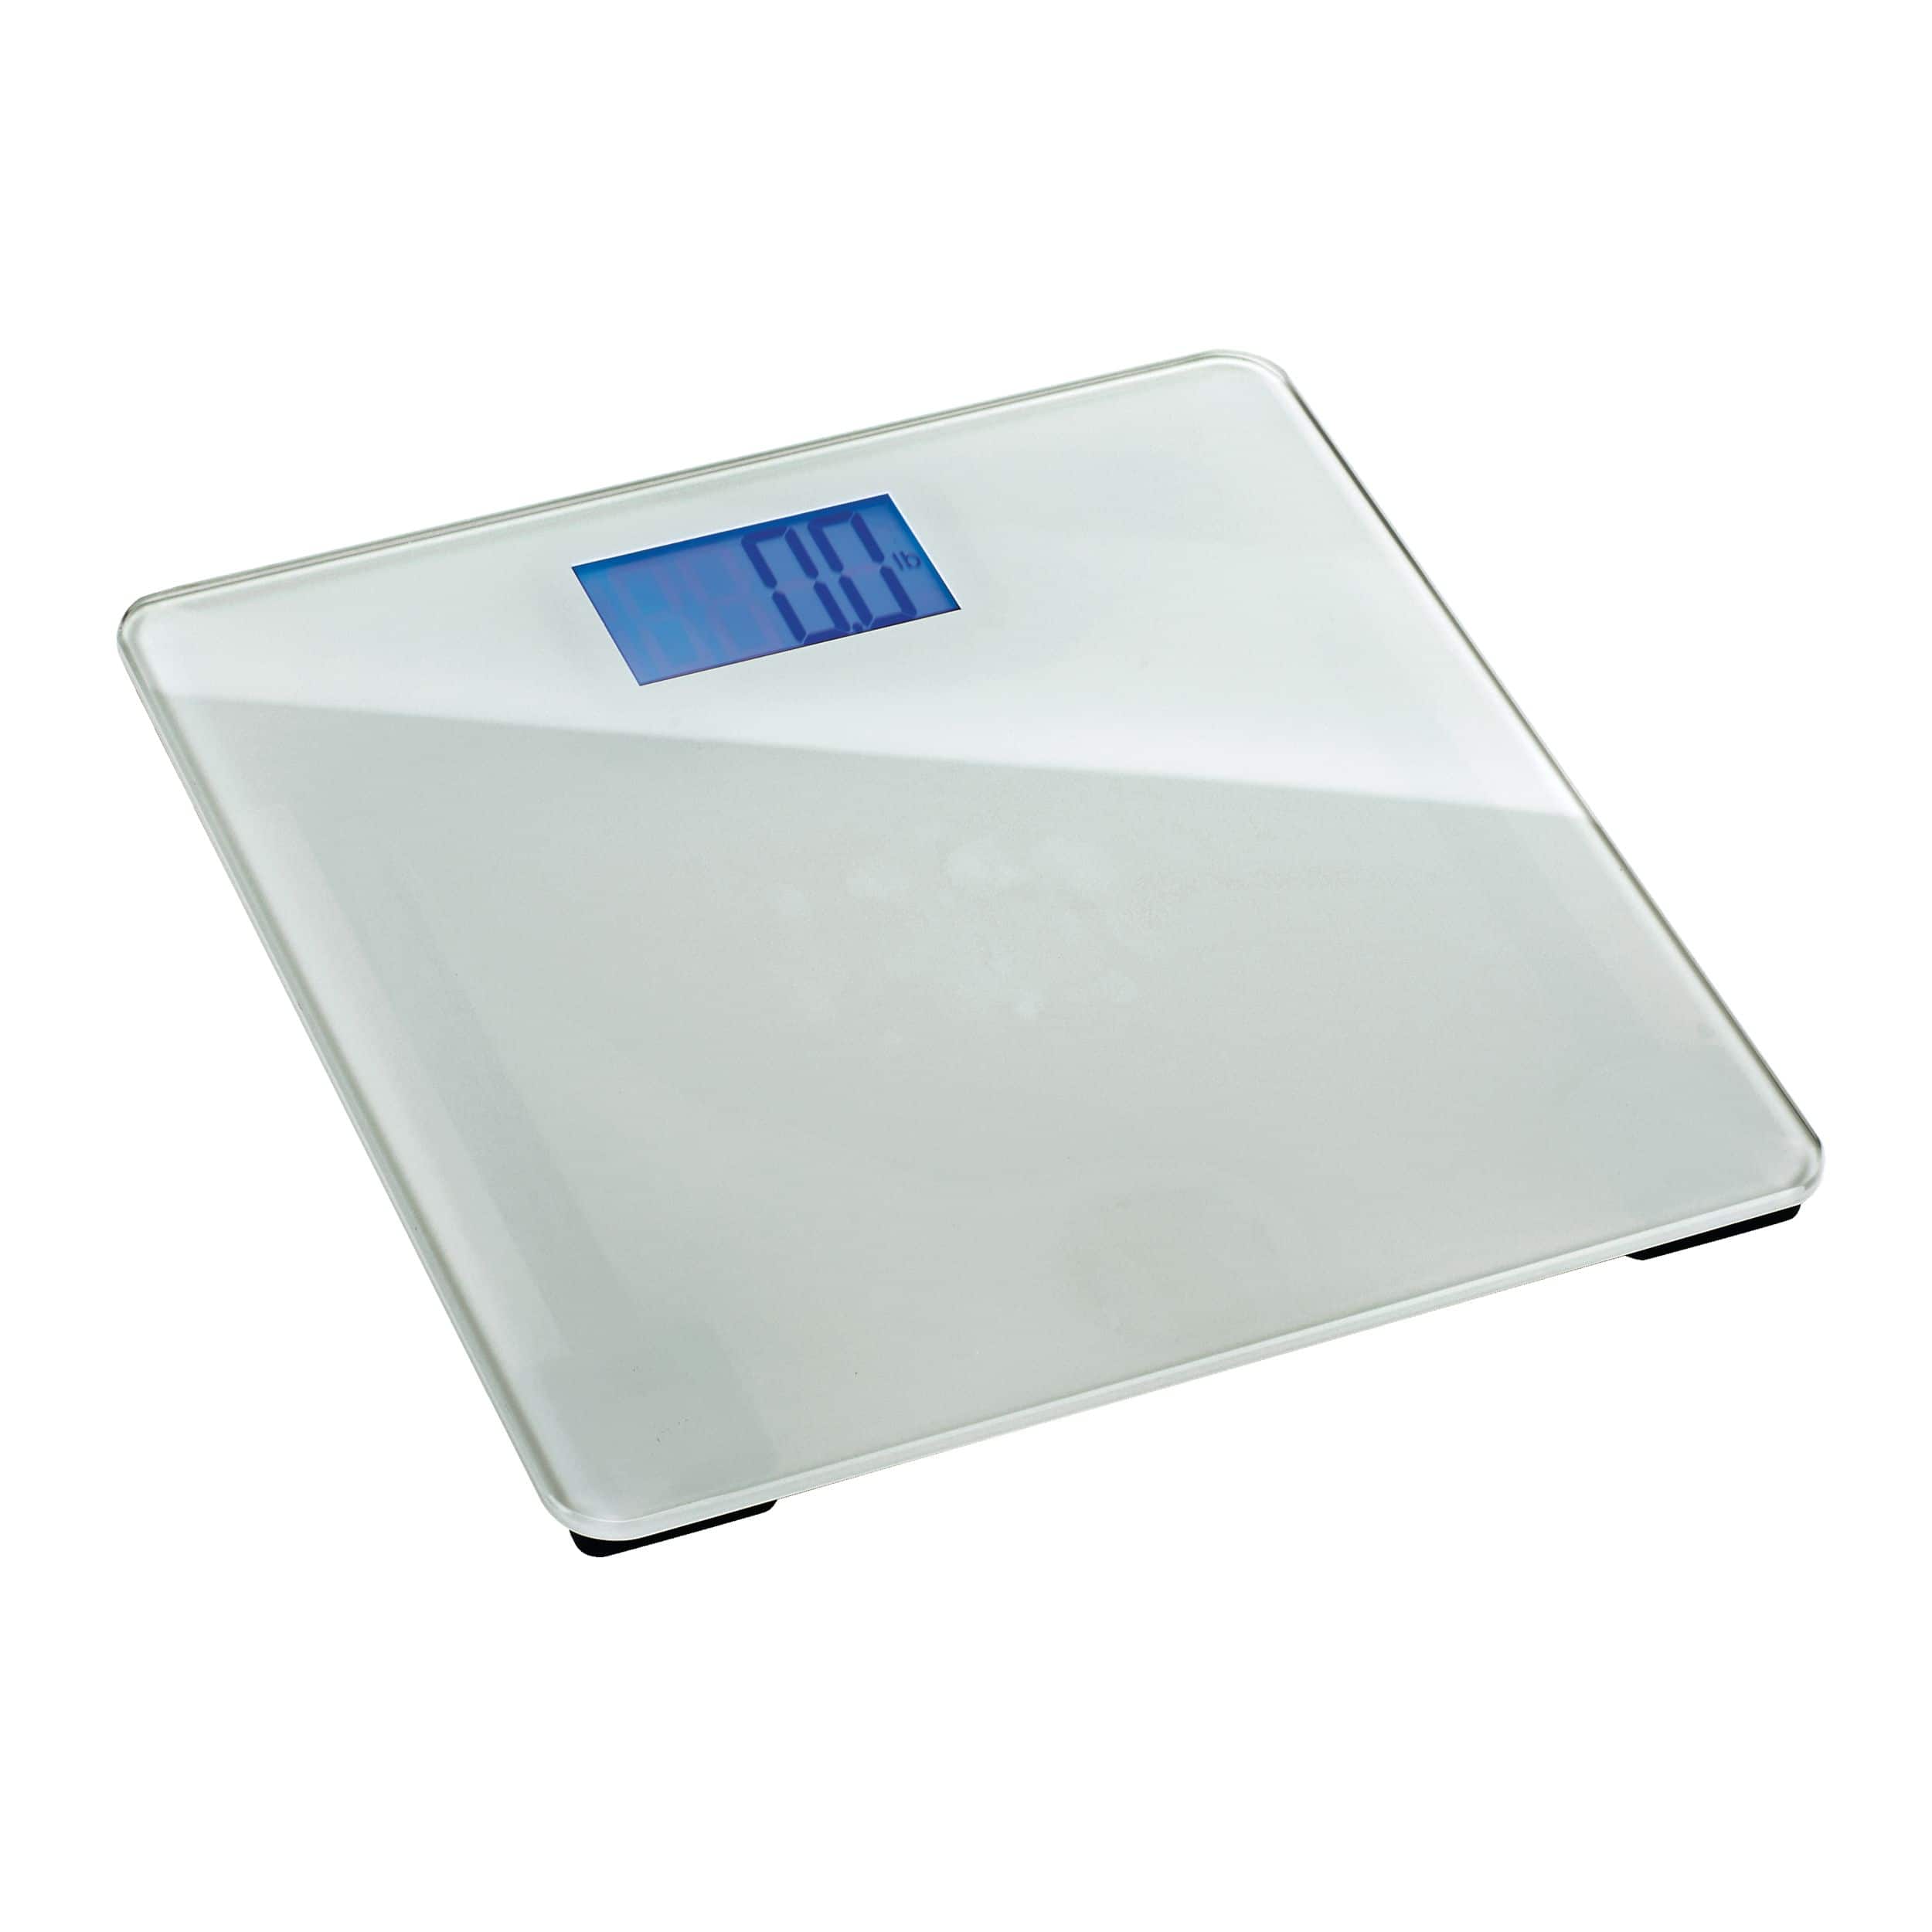 digital body weight bathroom scale bmi, accurate weight measurements scale,large  backlight display and step-on technology,400 pounds,body tape measure  included (bmi) 